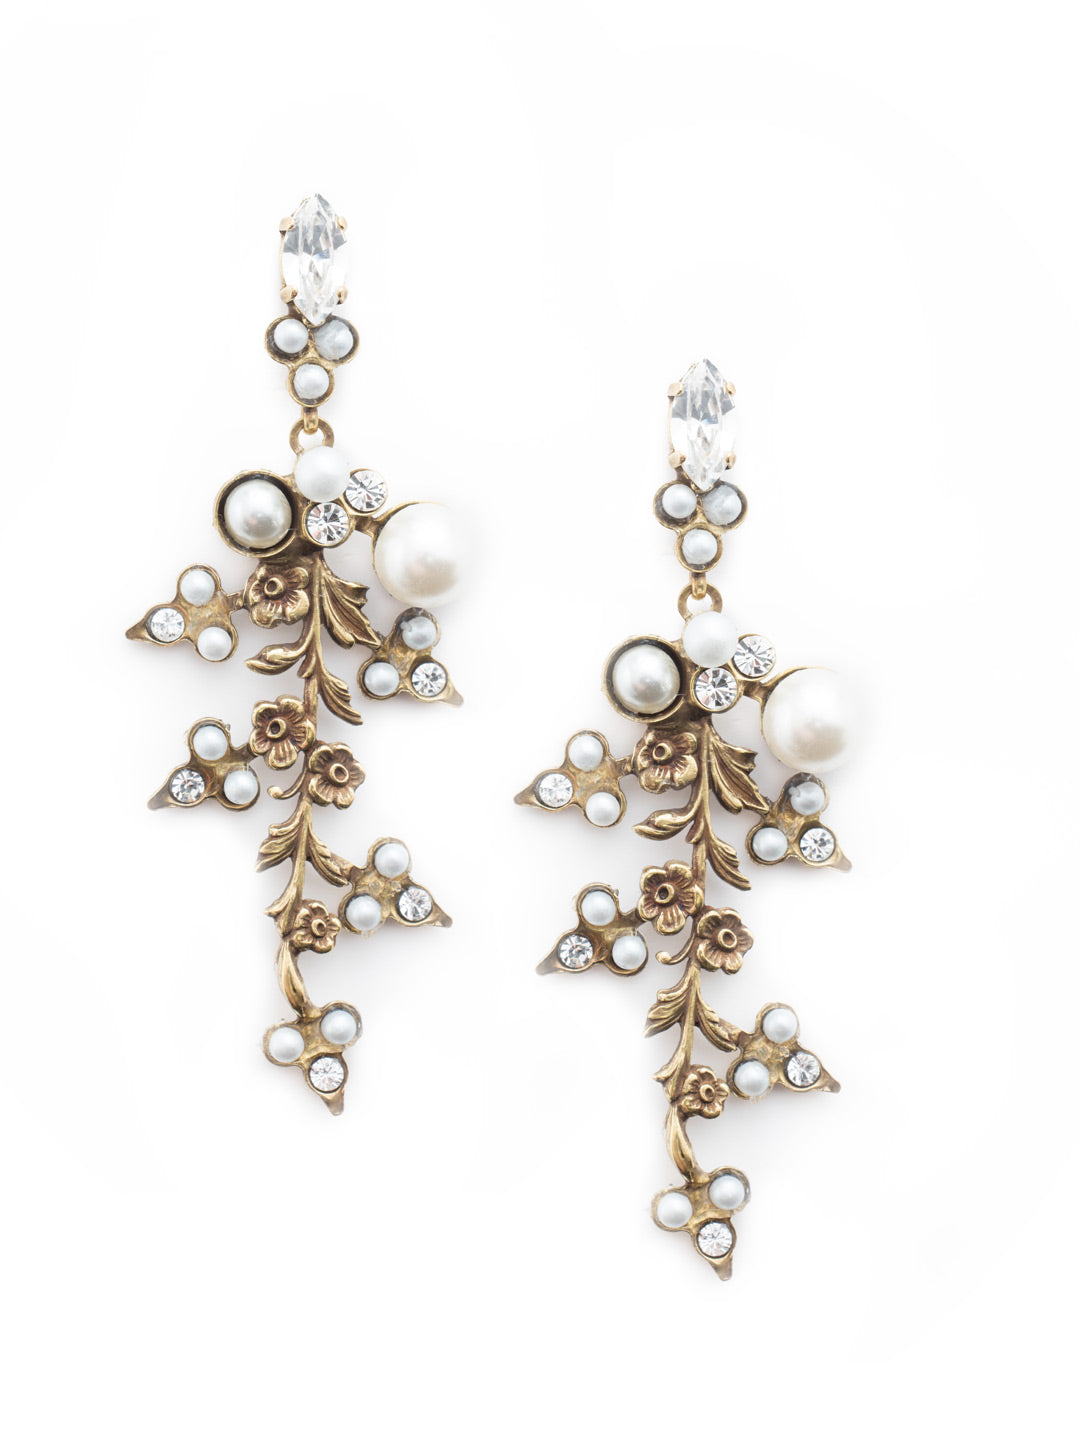 Evie Statement Earring - EET87AGMDP - The Evie Statement Earrings mix beautiful metalwork and timeless freshwater pearls. From Sorrelli's Modern Pearl collection in our Antique Gold-tone finish.